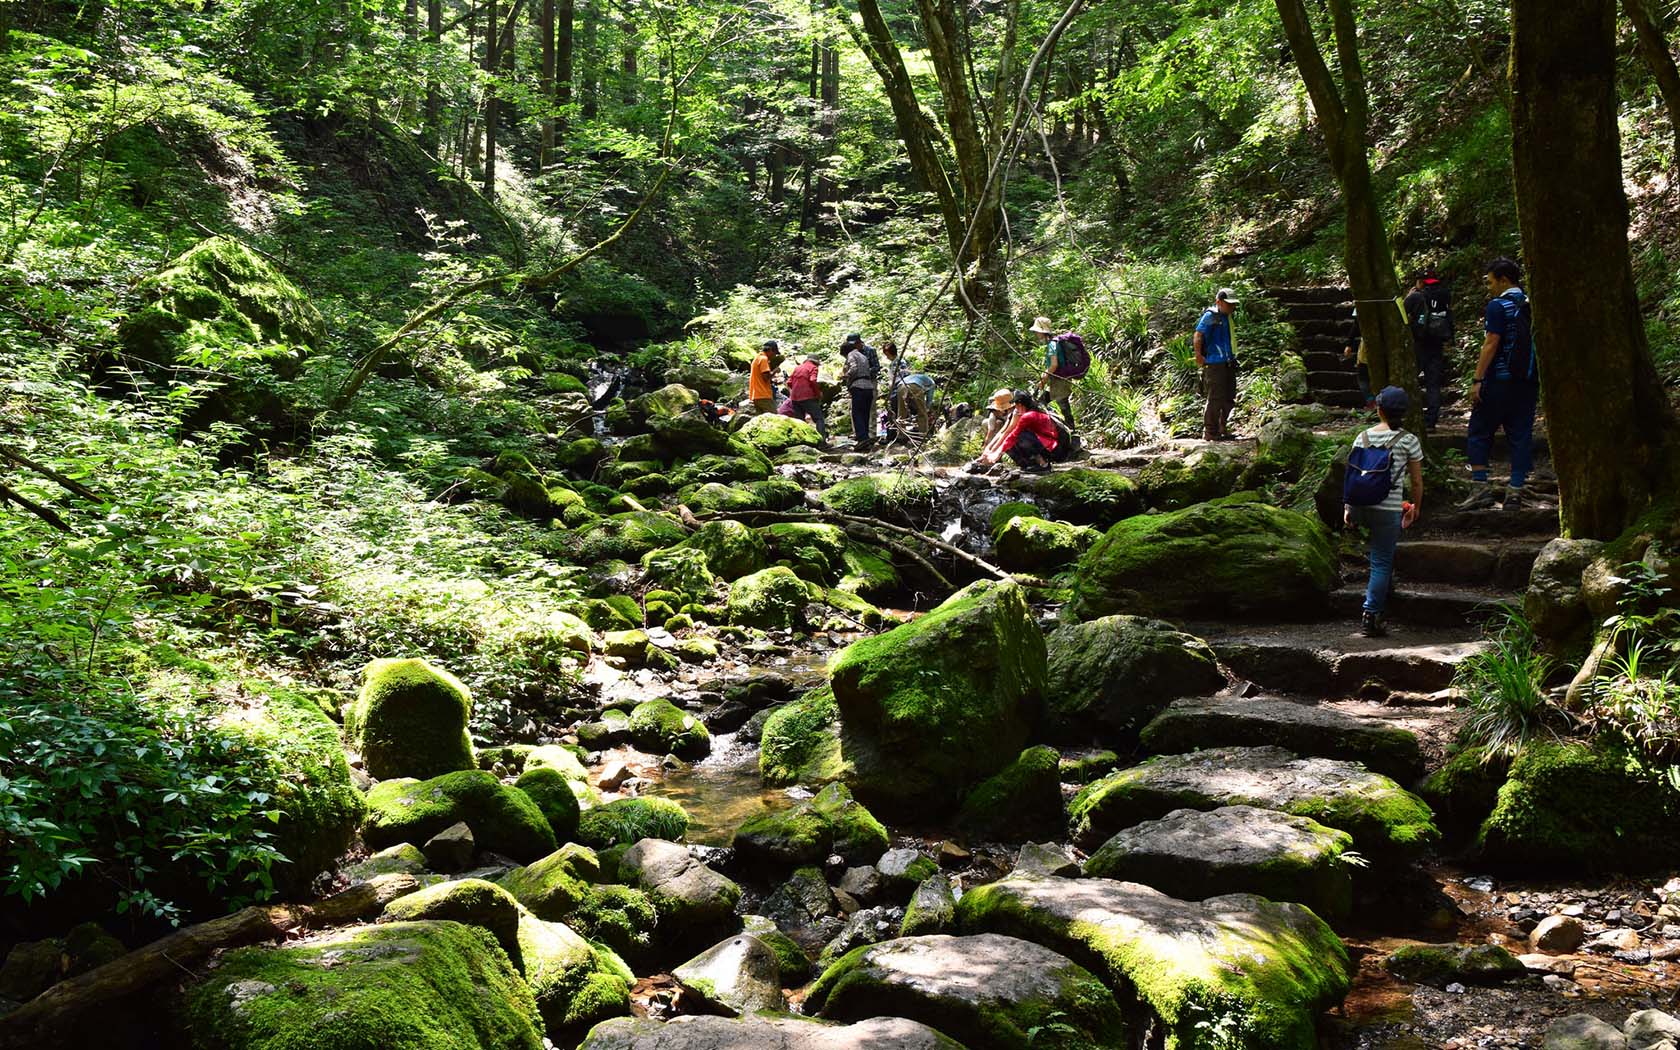 Hiking trails in Ome, Japan